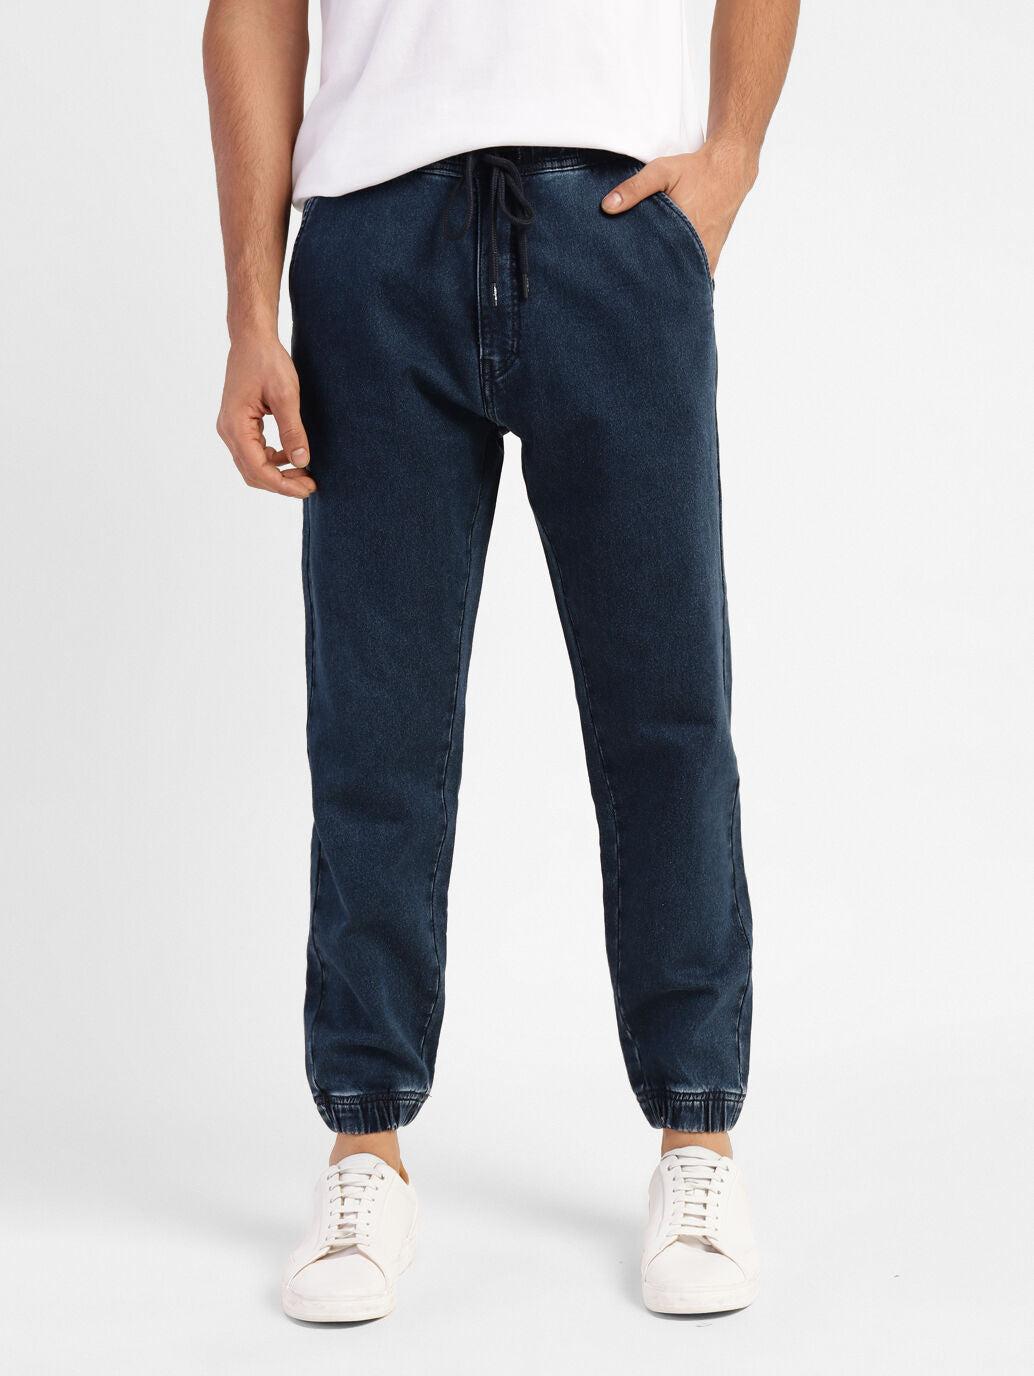 LEVI'S® MEN'S RELAXED FIT JOGGERS A2837-0005